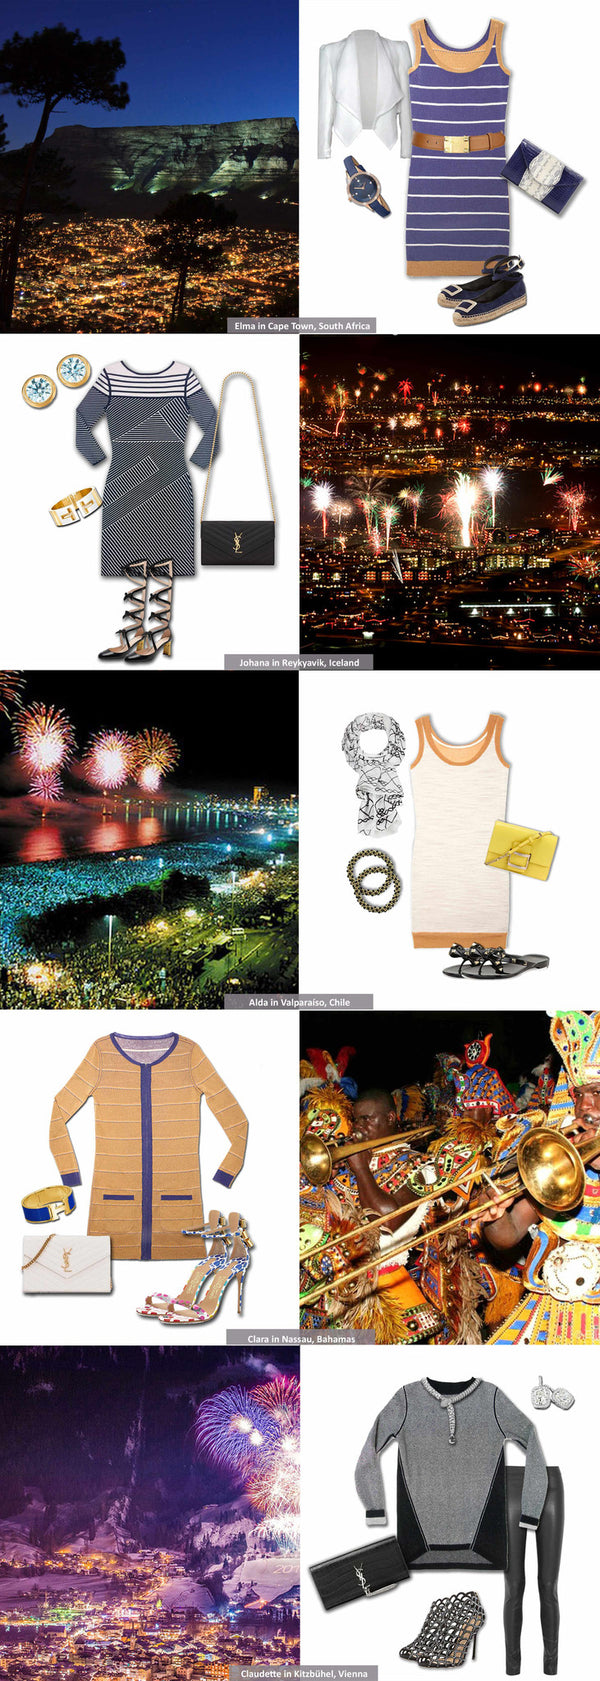 Top New Year's Eve Destinations & Style